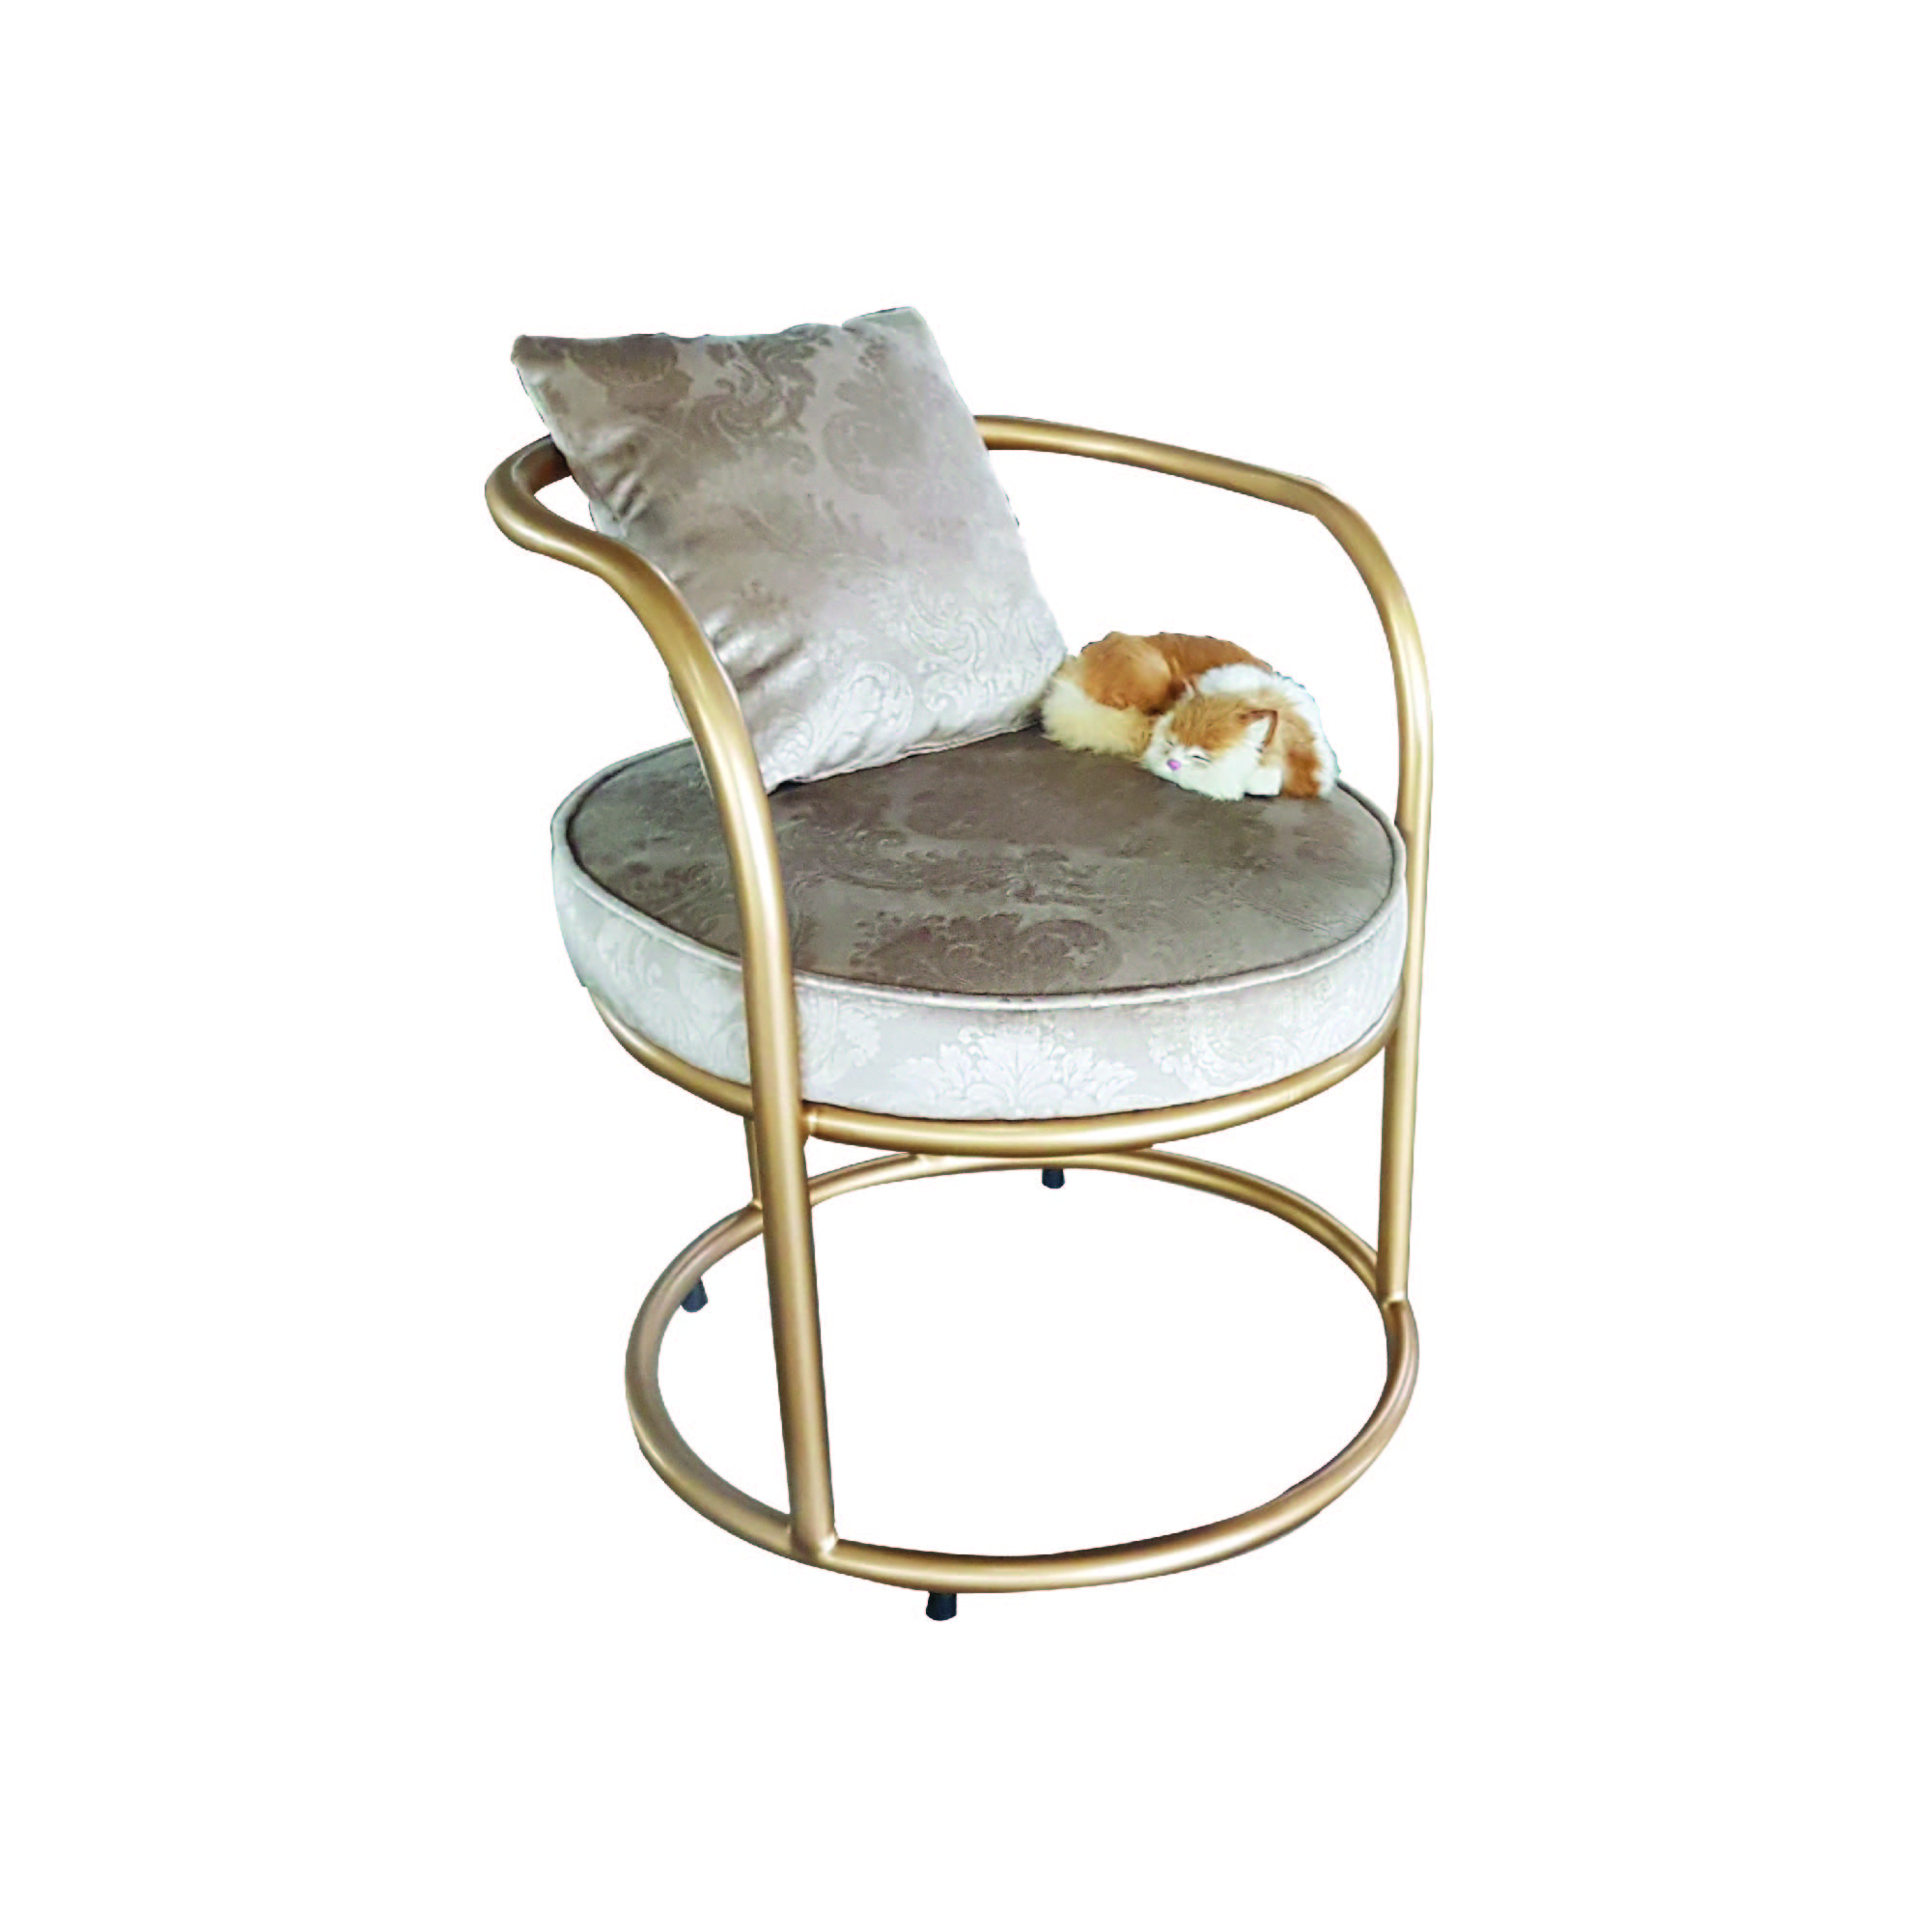 Mobili Casa, Gold Base With Beige Chair, CHGOLD